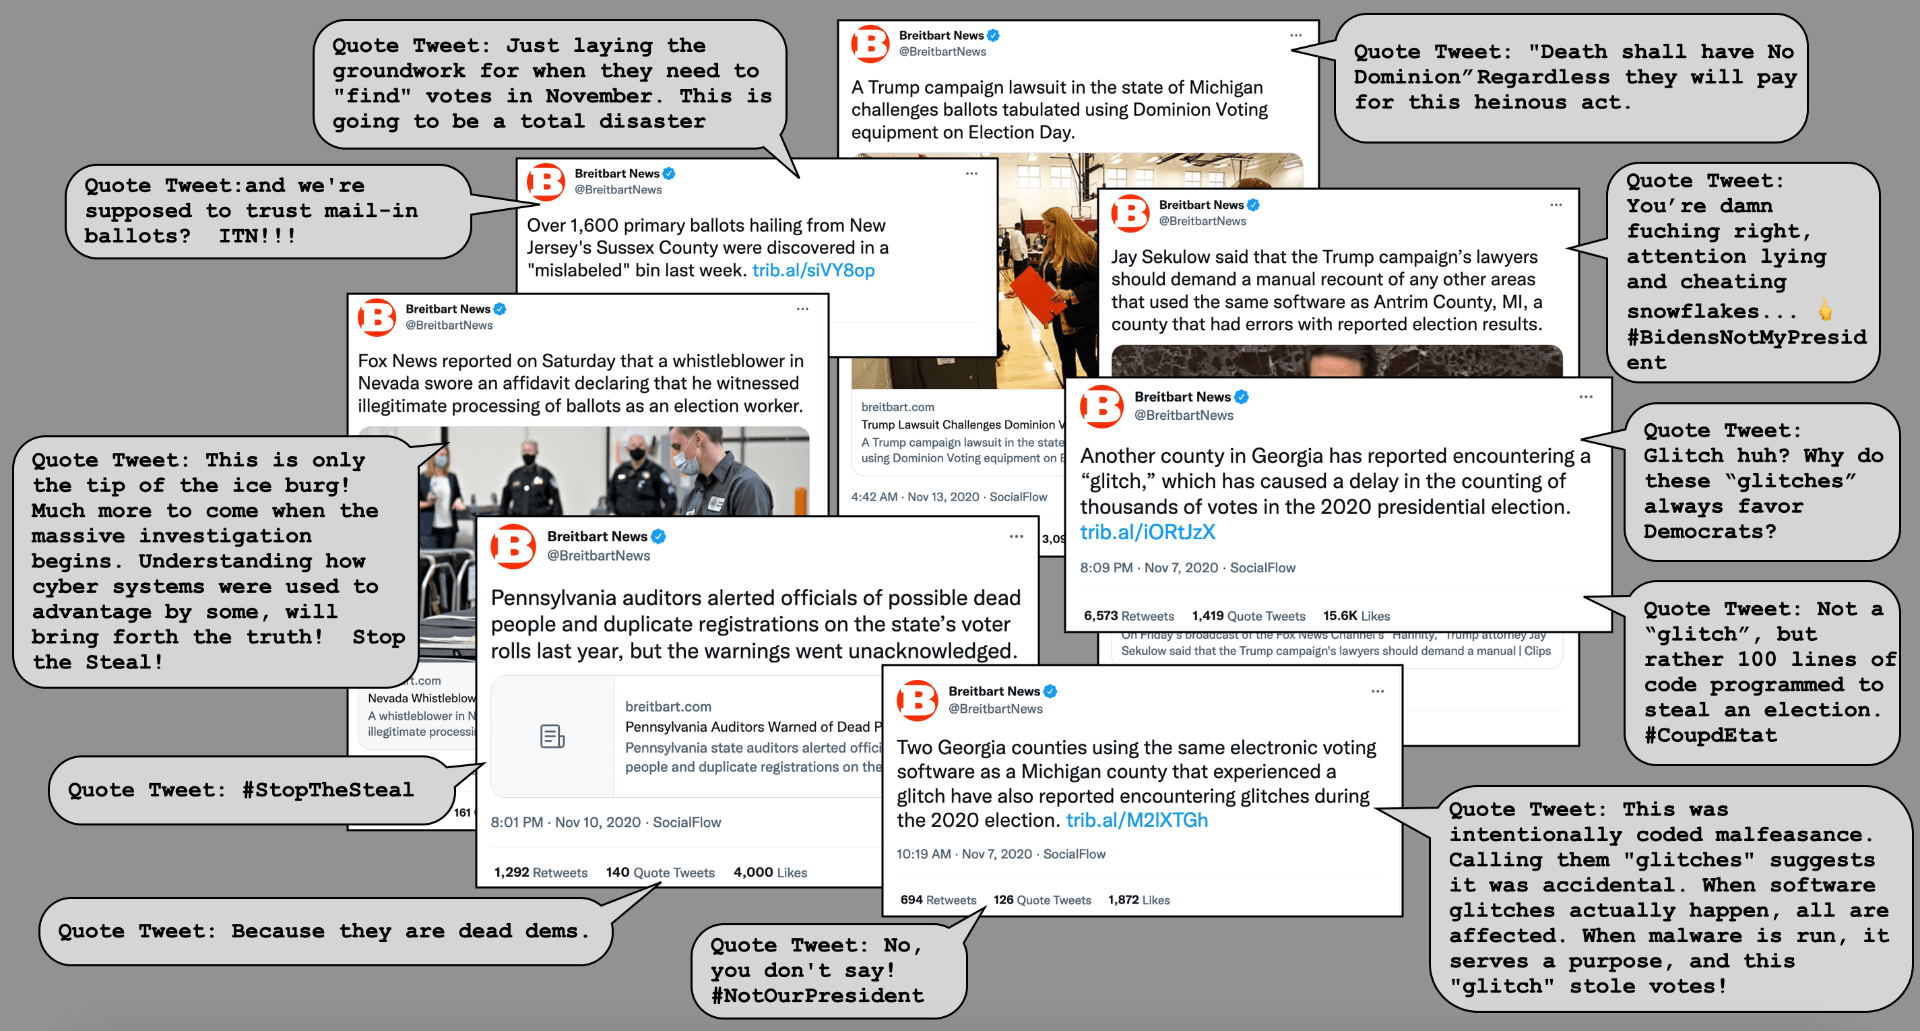 A composite image of selected Breitbart tweets with associated quote tweets.